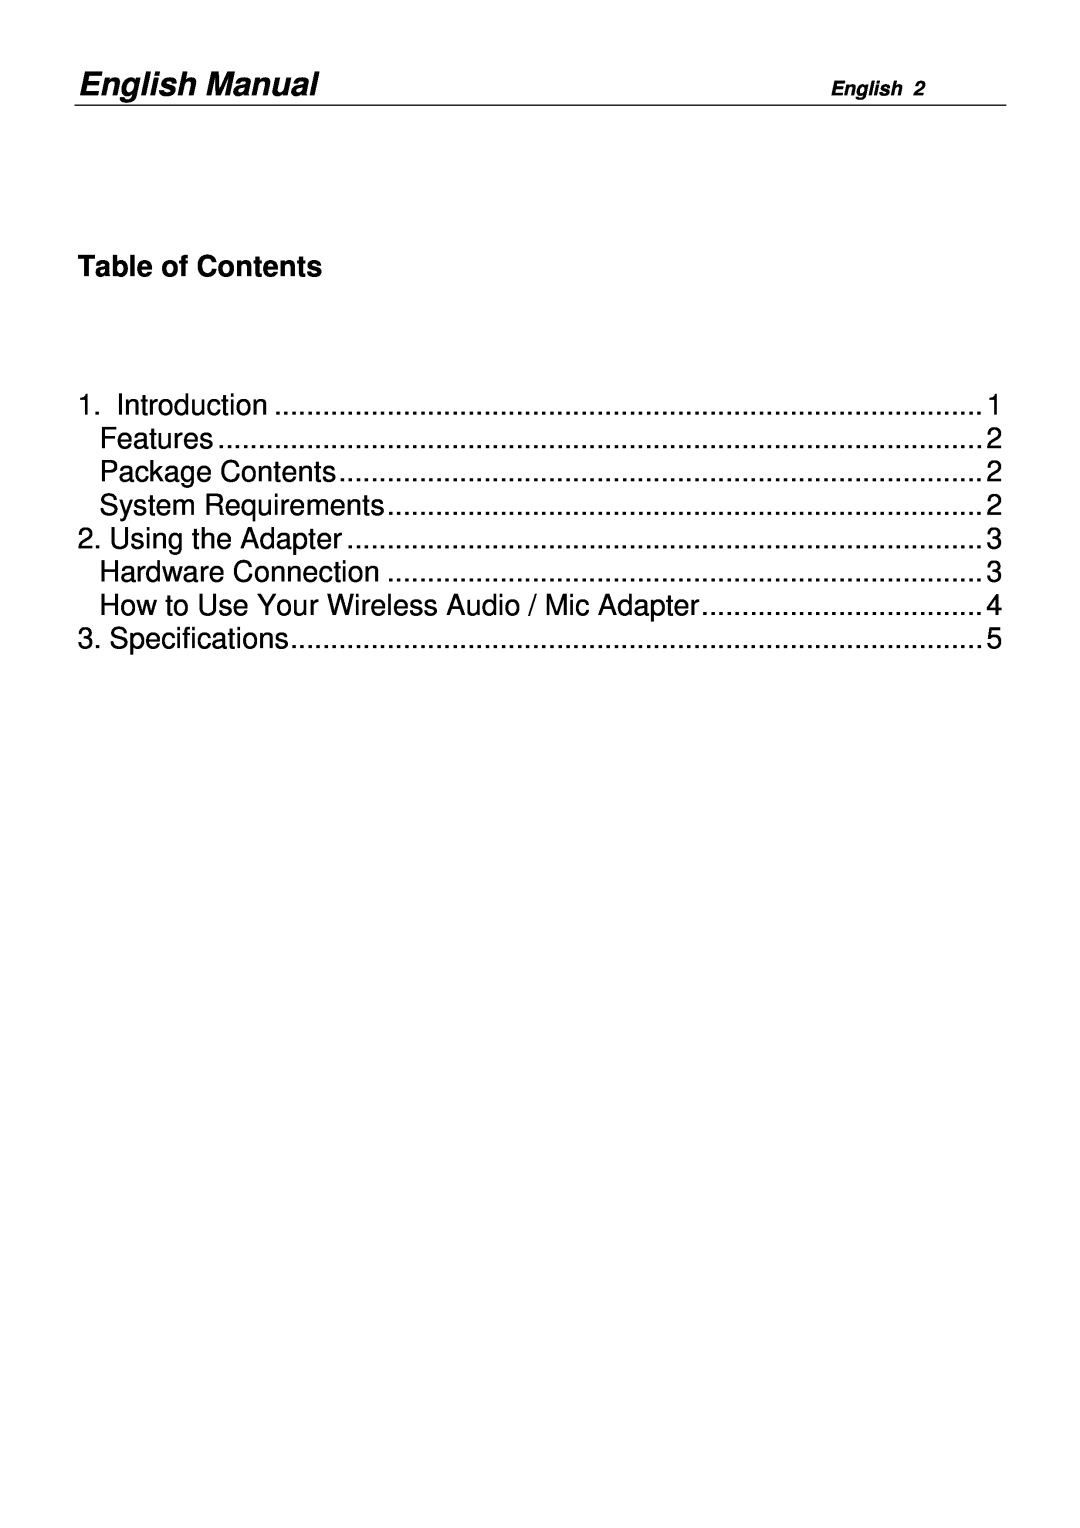 Lindy 20404 user manual English Manual, Table of Contents 